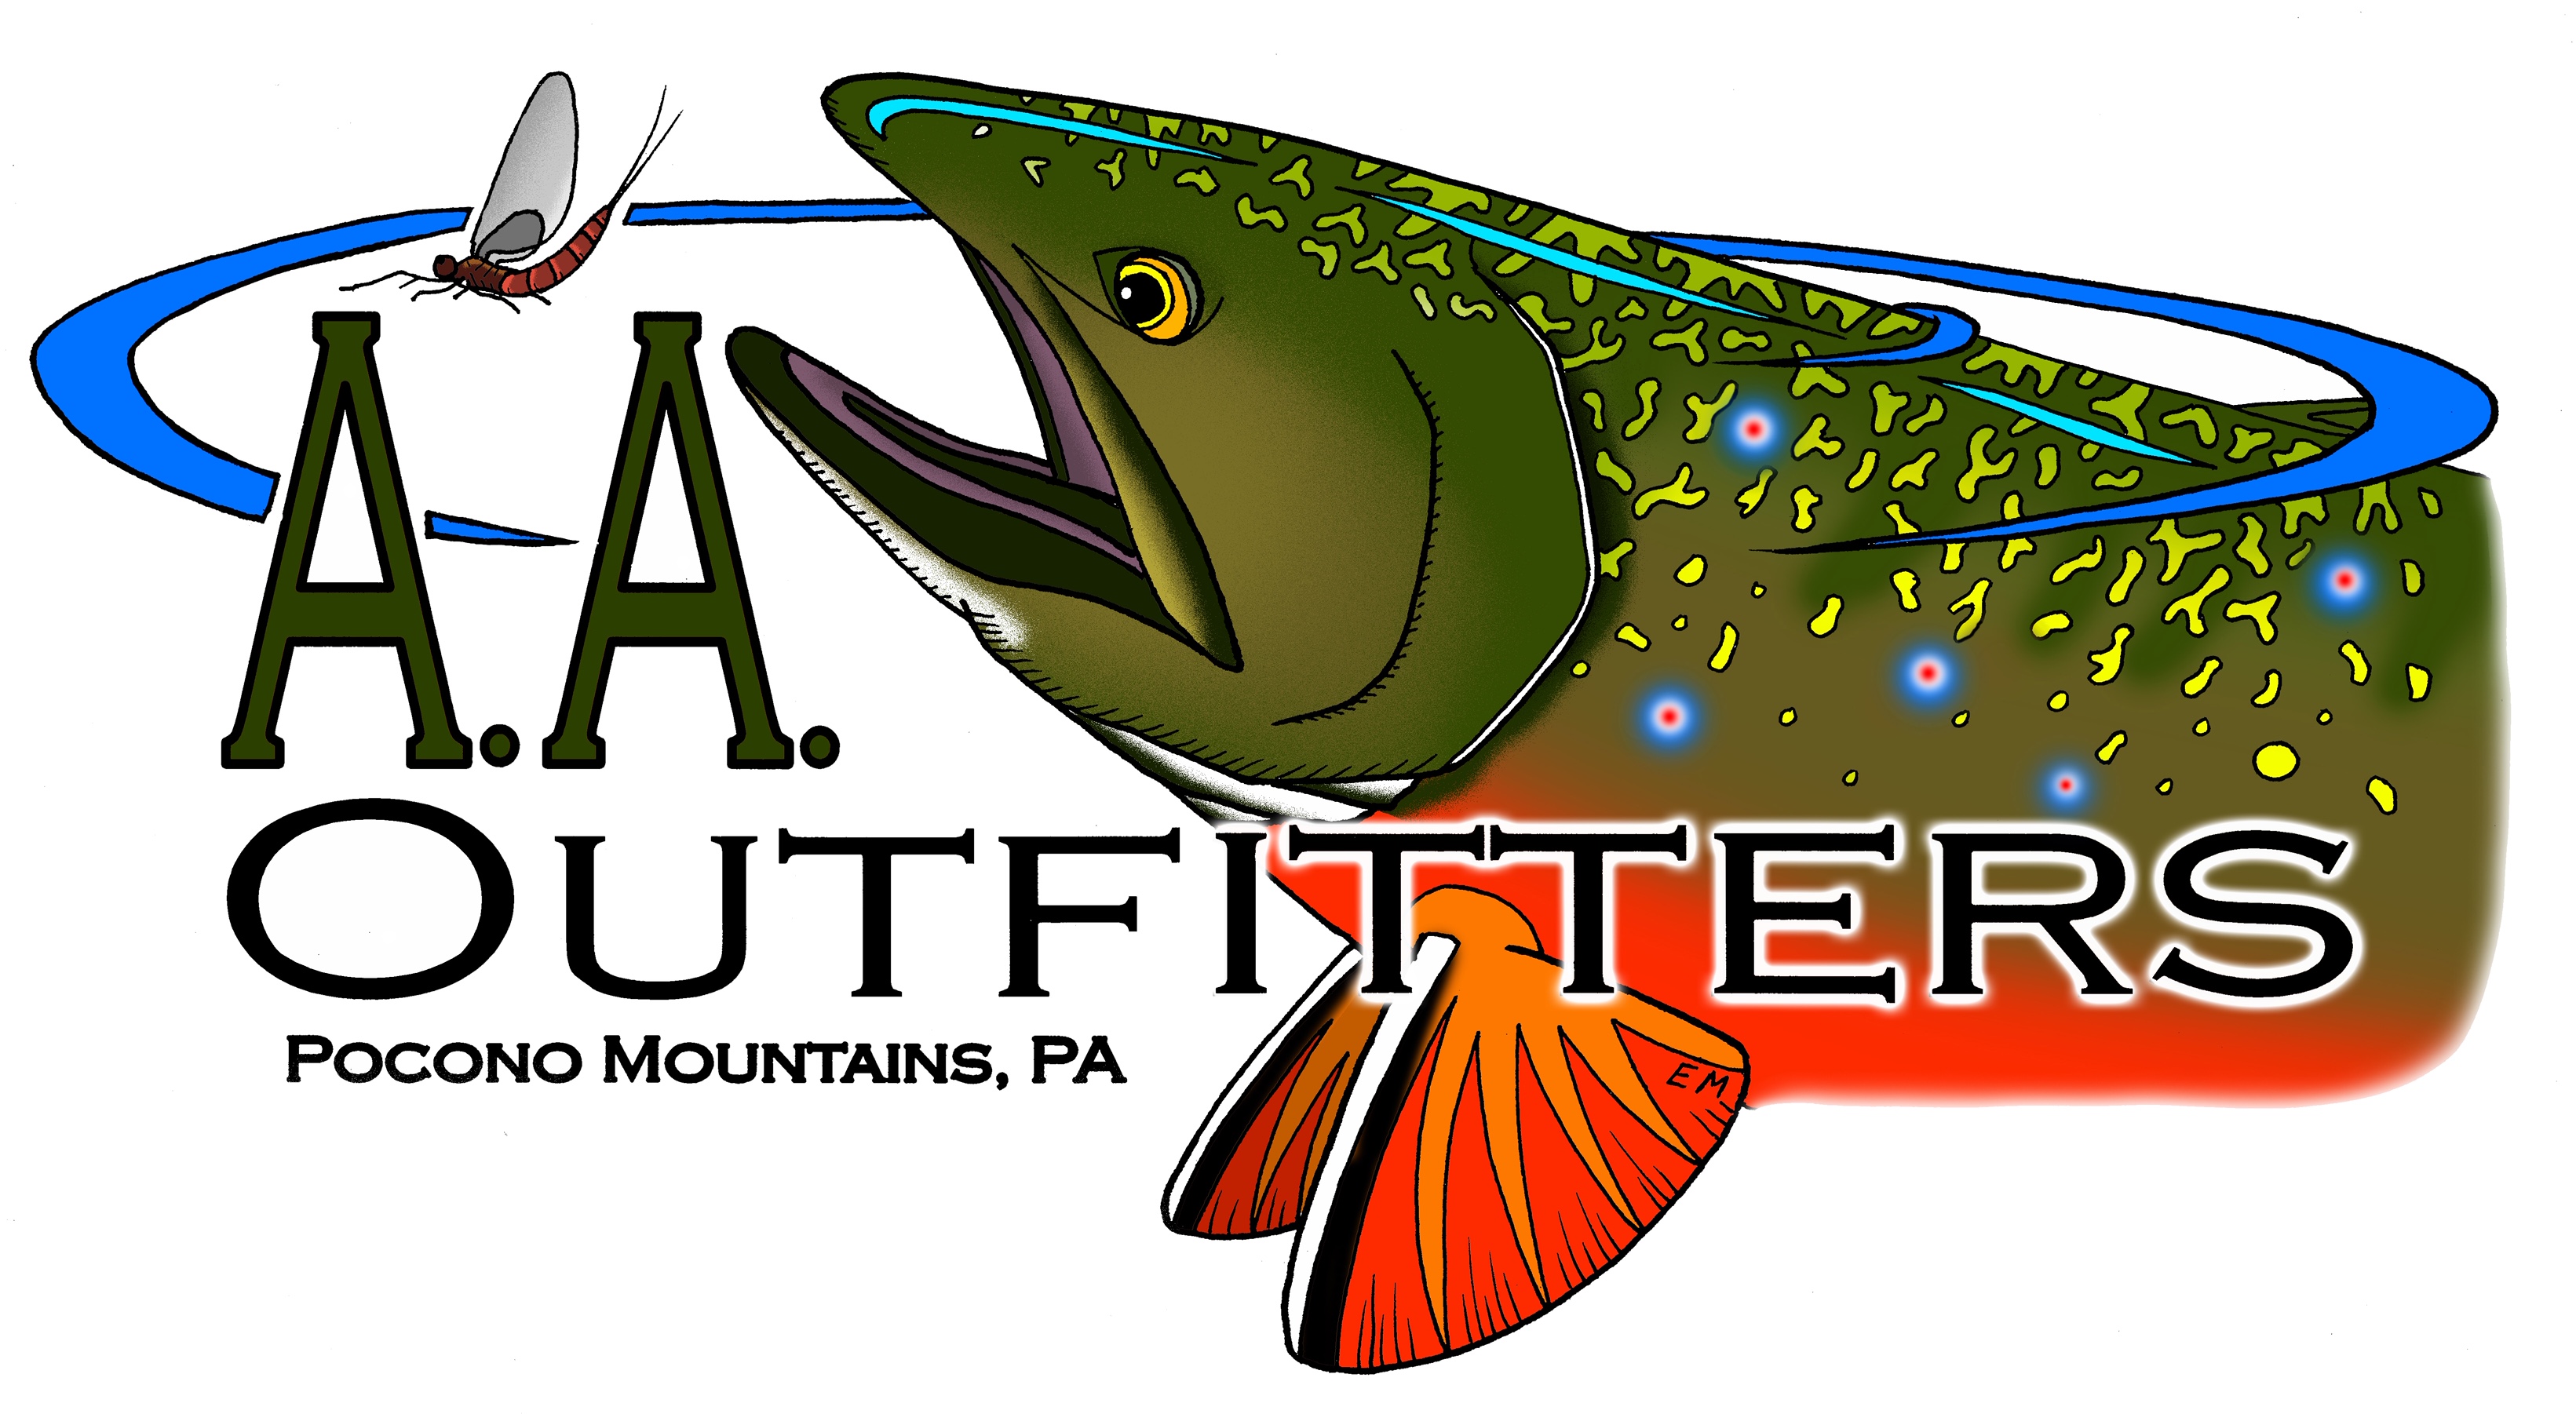 https://www.aaoutfitters.com/image/catalog/logo_new.jpg